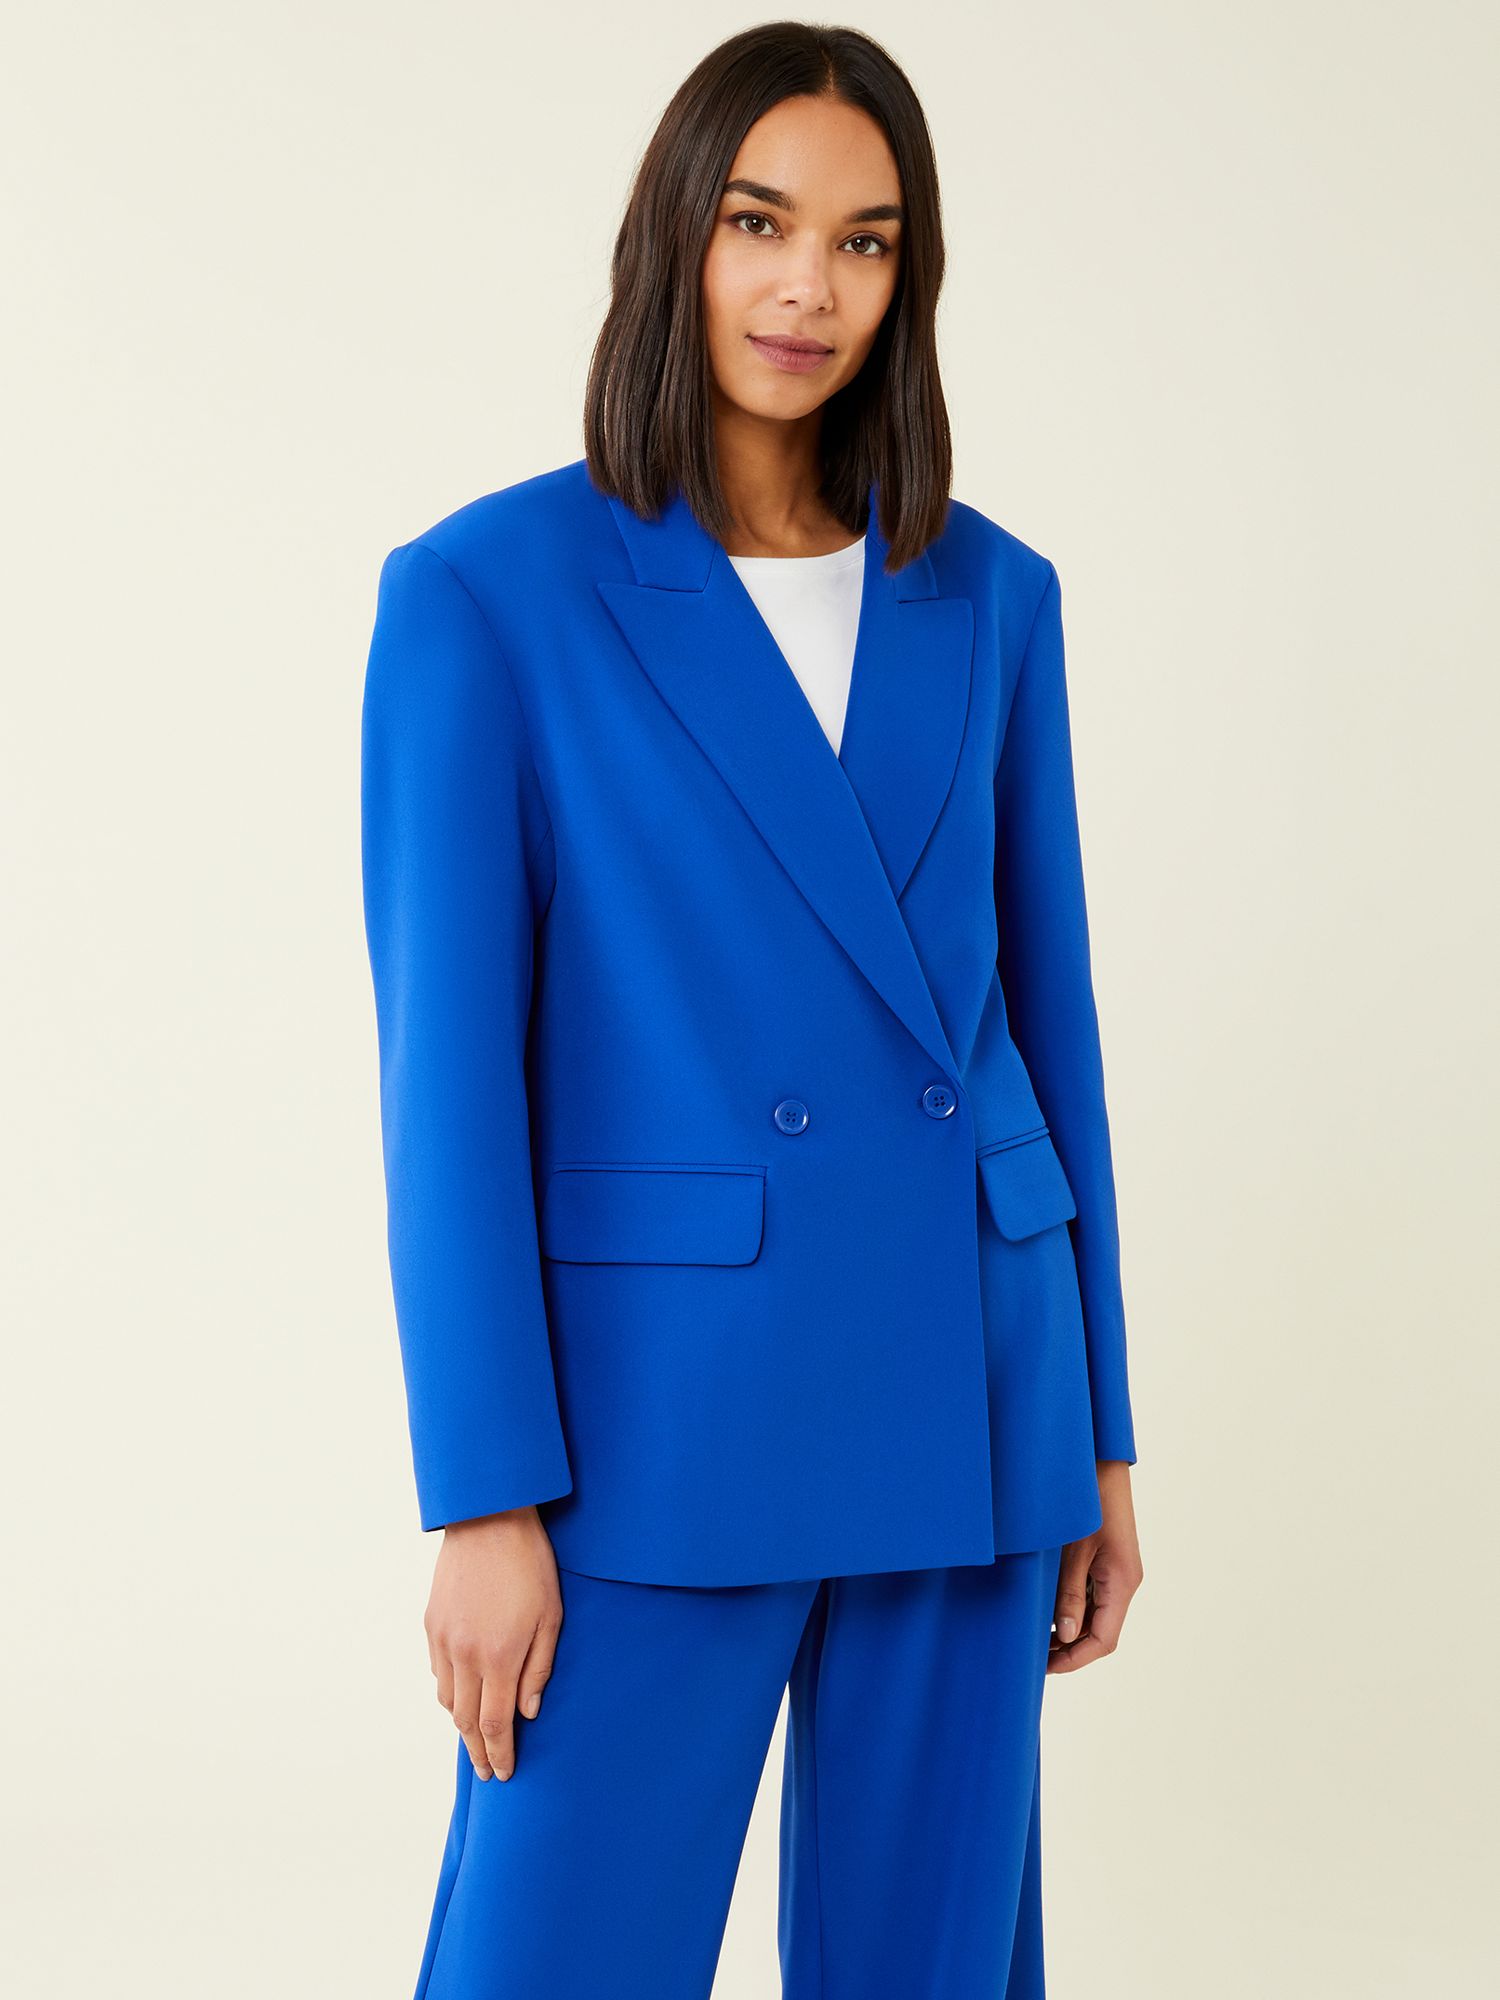 Finery Maeve Double Breasted Blazer, Cobalt Blue at John Lewis & Partners